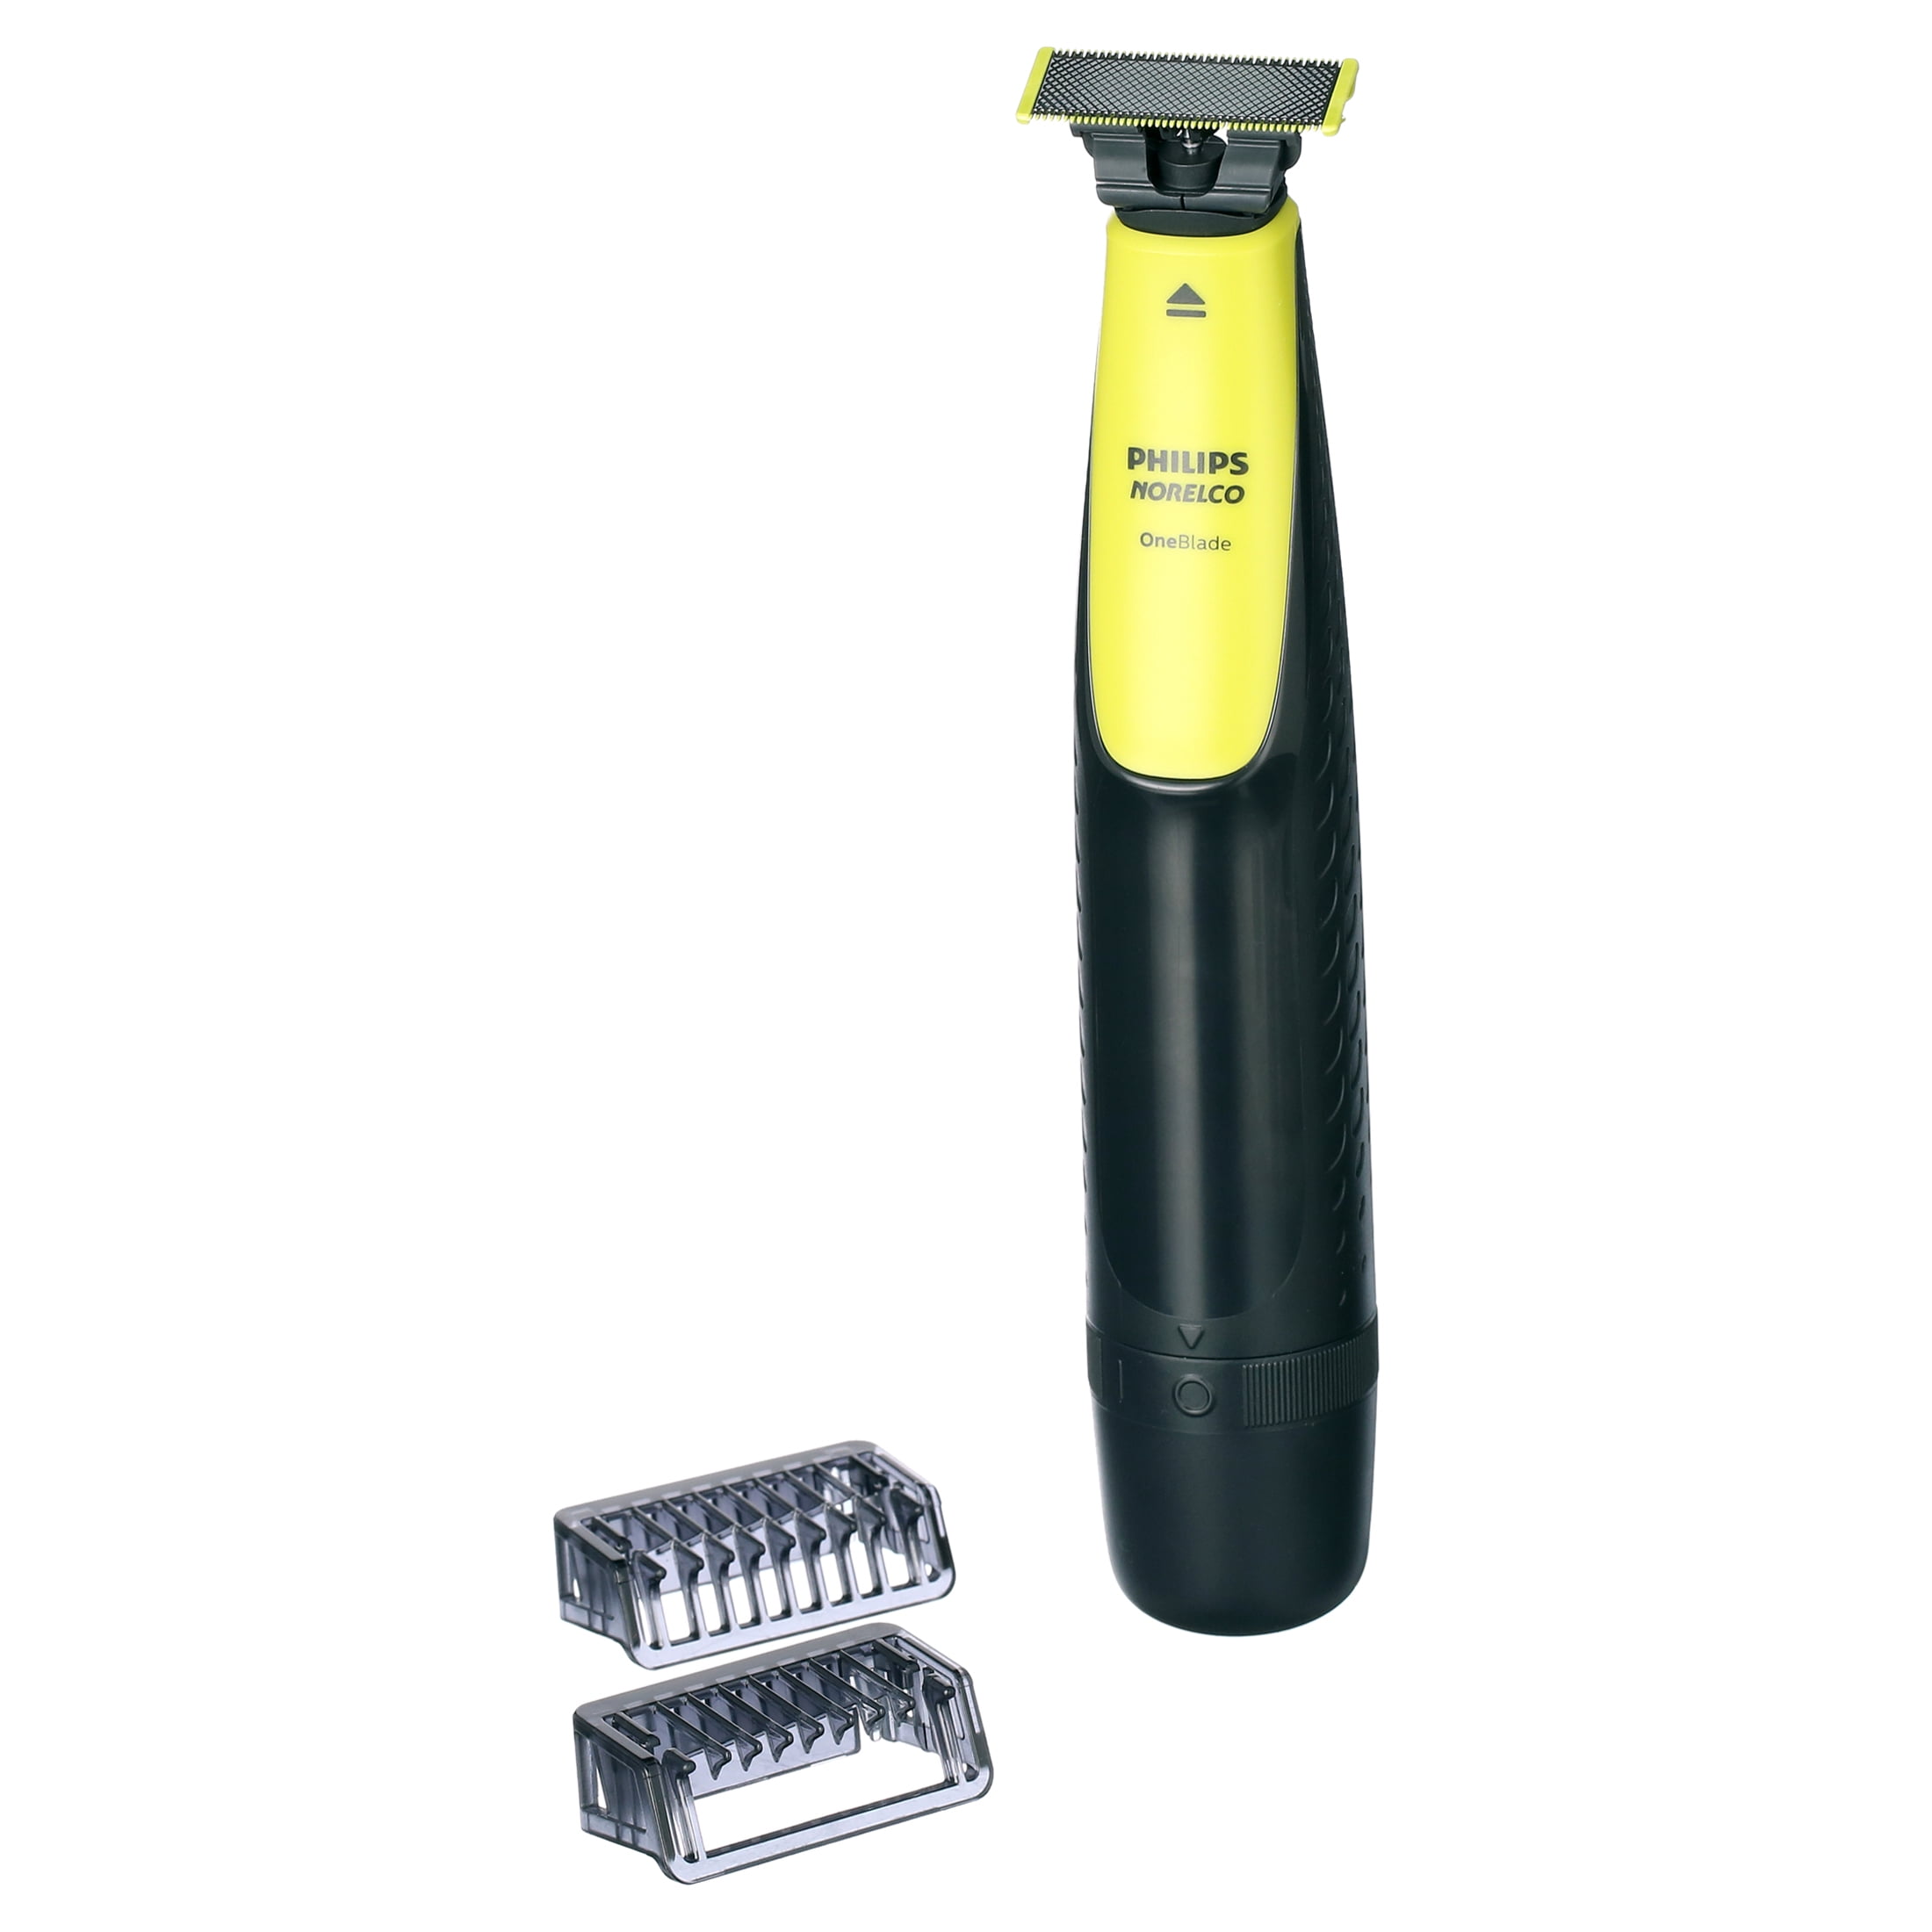 NEEGO Philips Oneblade Hybrid Electric Trimmer and Shaver QP2510/49 Case  for Philips Norelco Oneblade